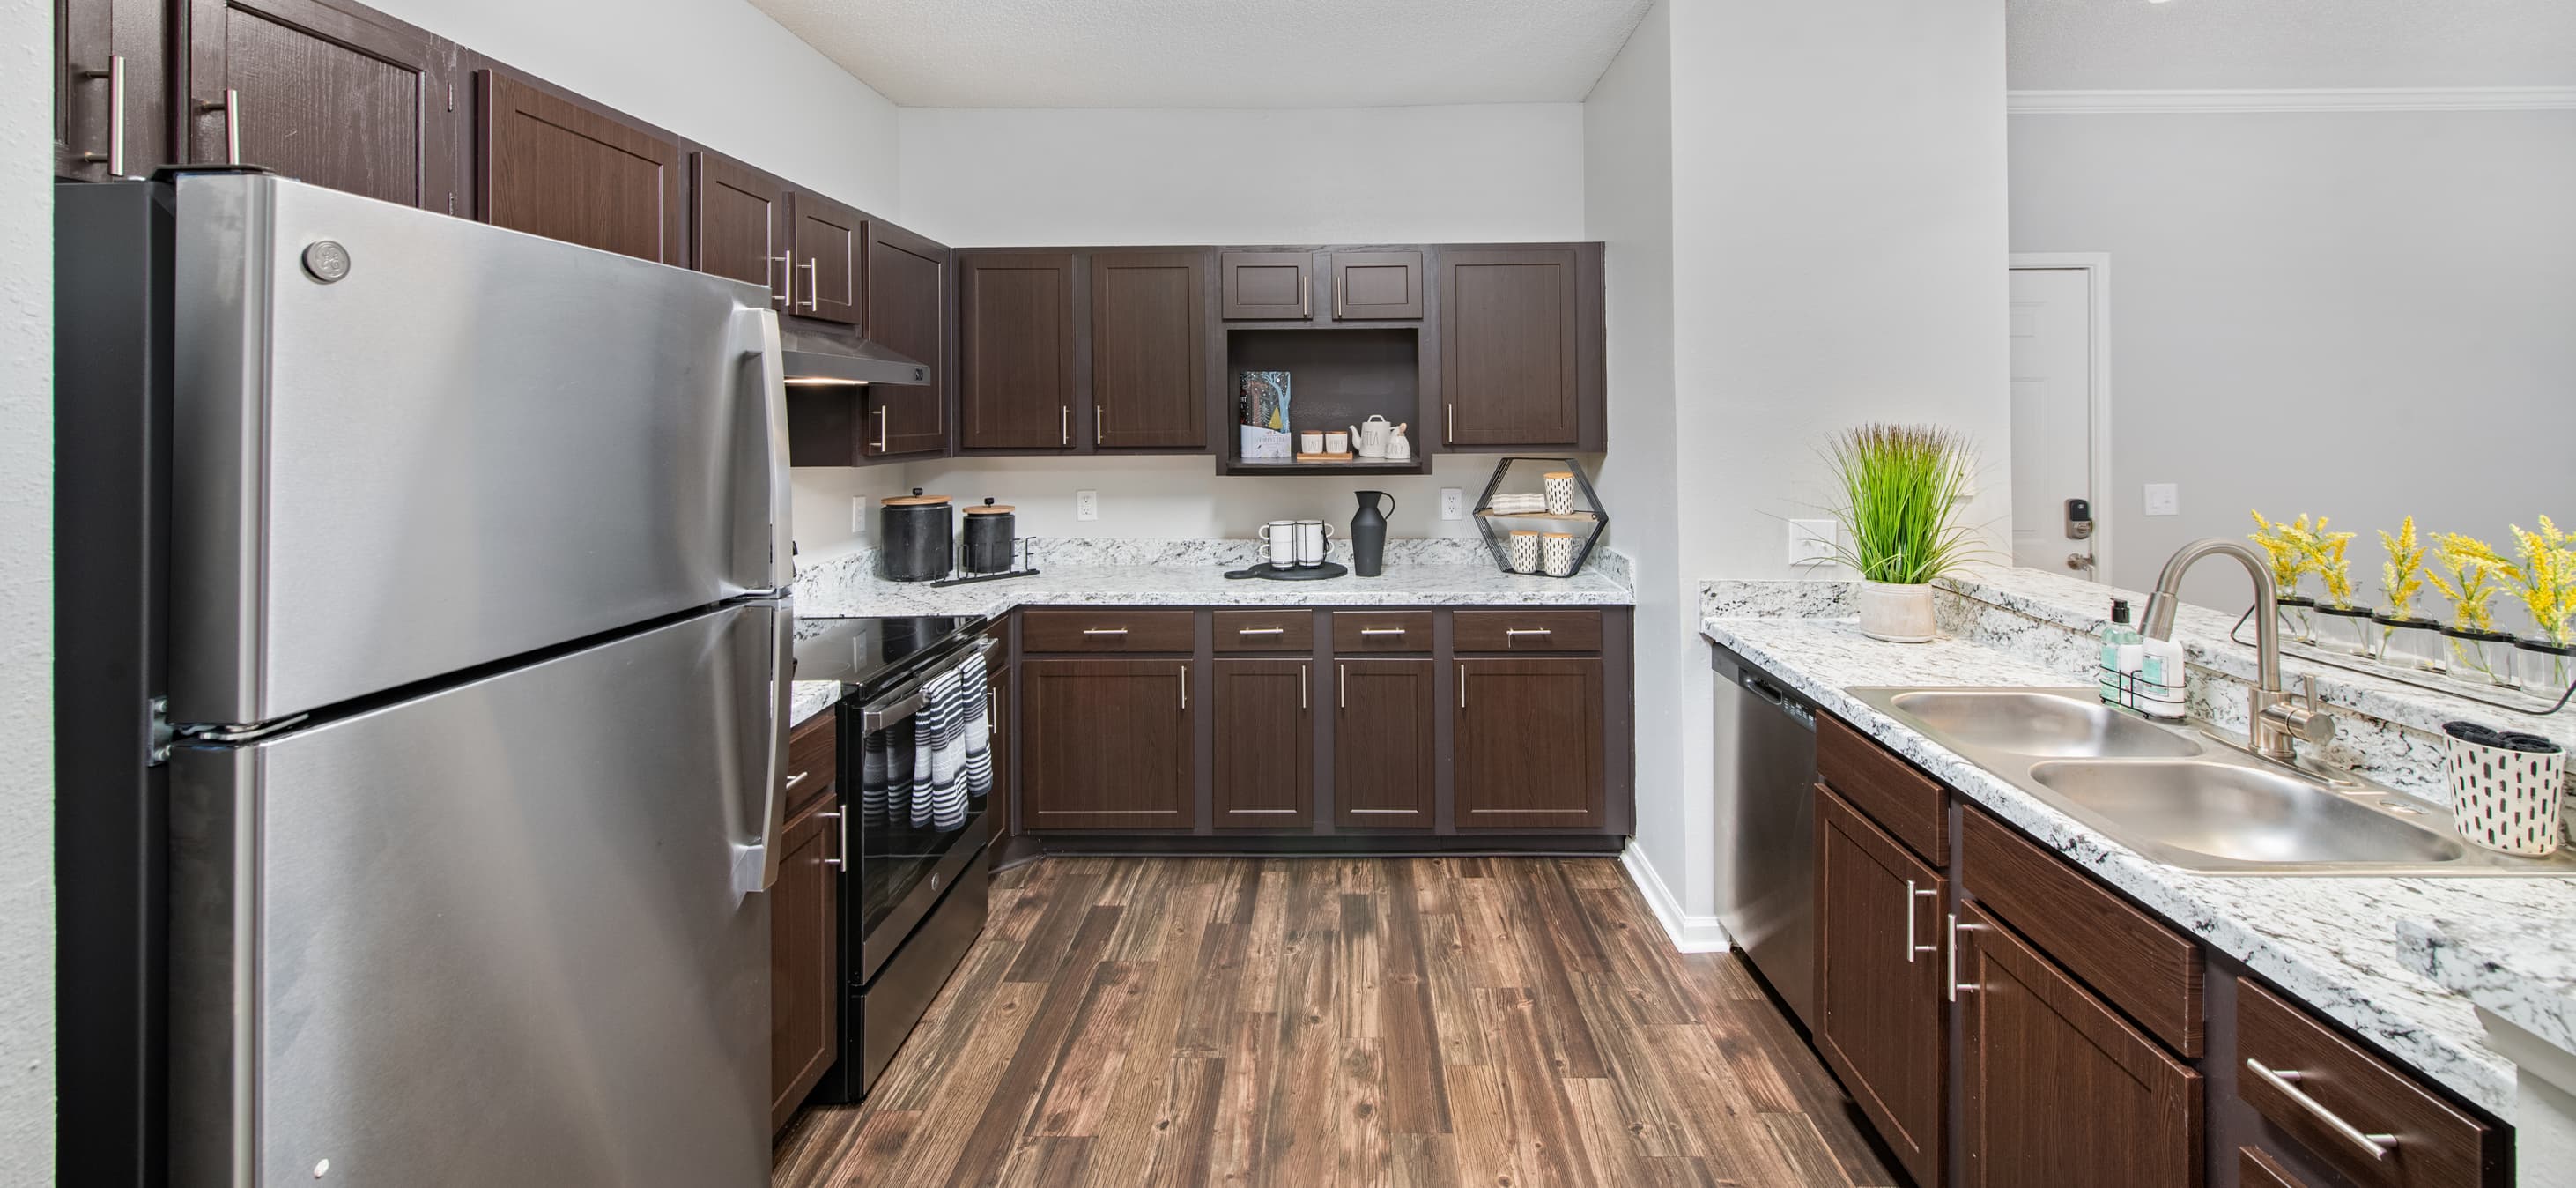 Kitchen at Reserve at Dexter Lake luxury apartment homes in Cordova, TN